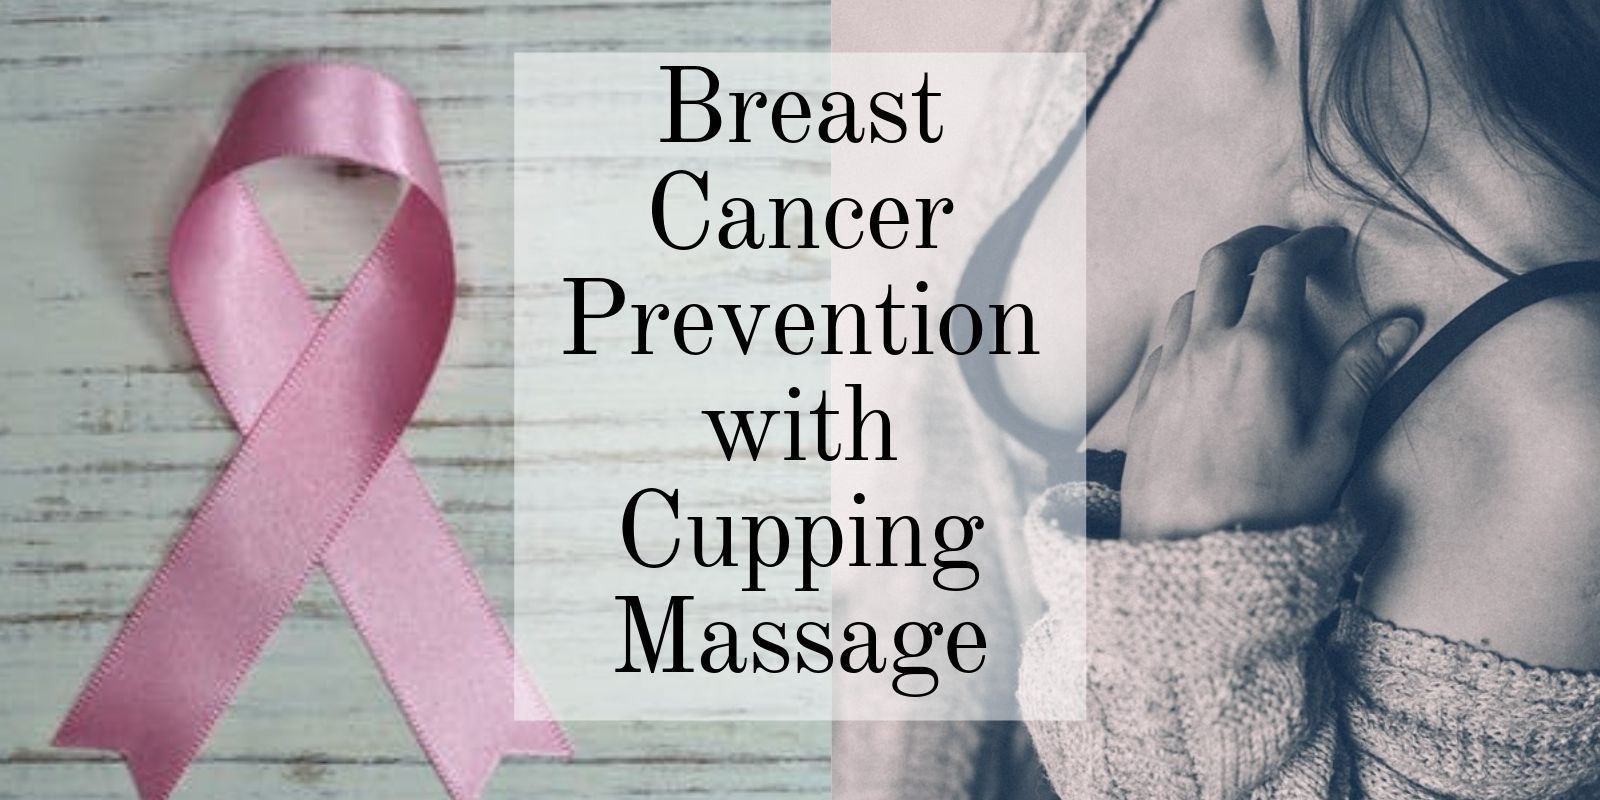 Breast Cancer Prevention with Cupping Massage - Lure Essentials